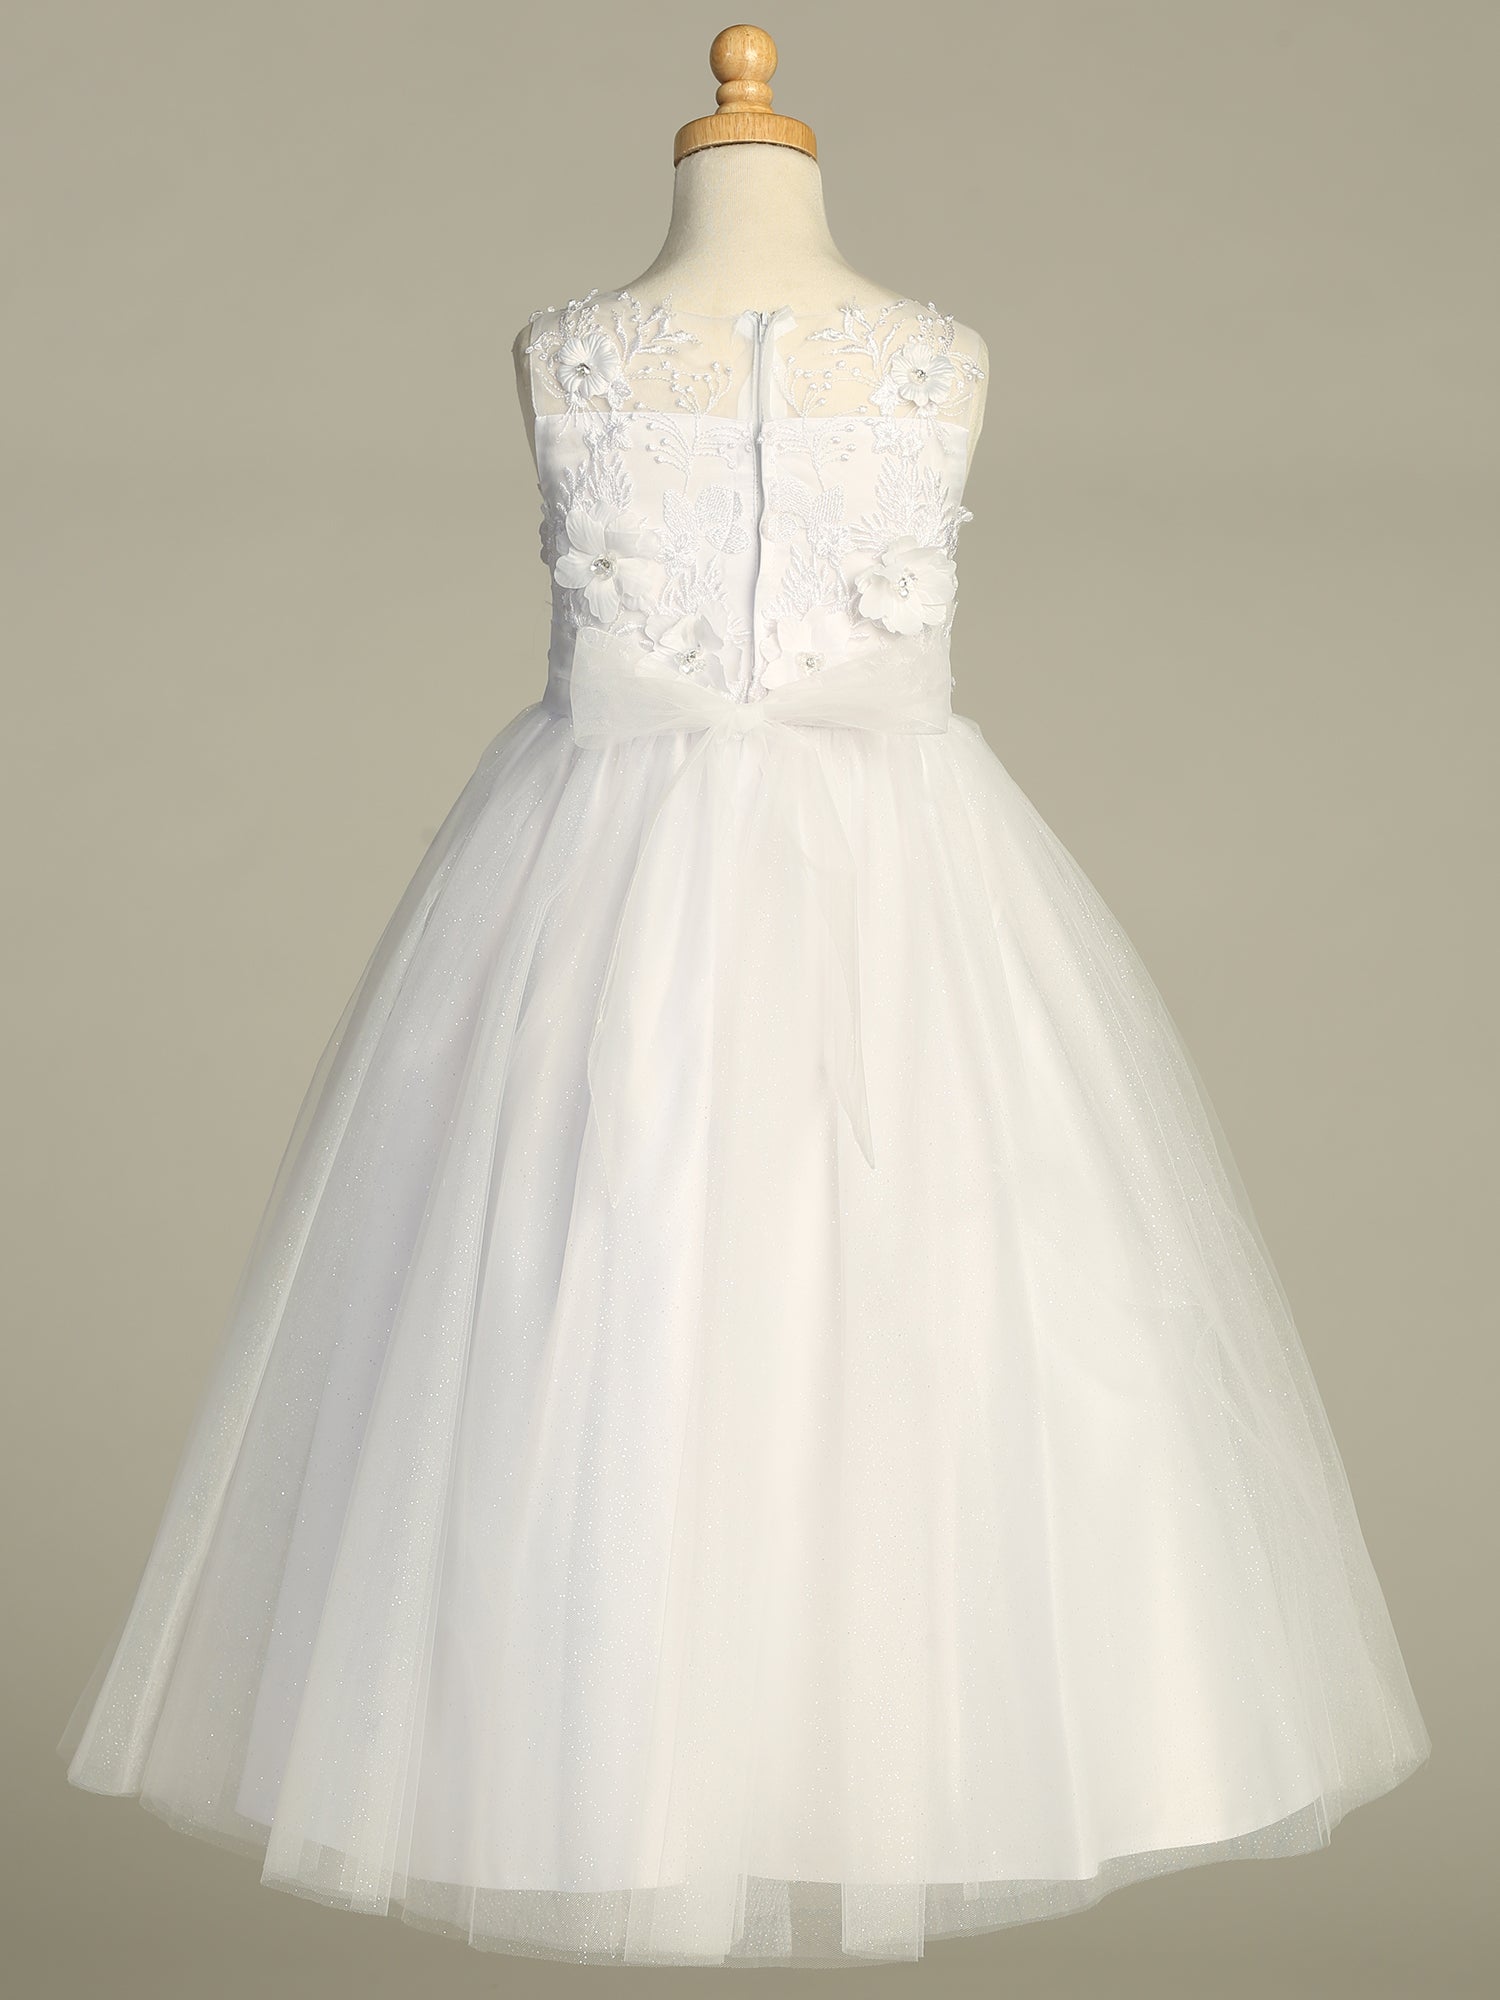 Close-up view of the embroidered tulle skirt adorned with 3D flowers on the First Communion Dress.